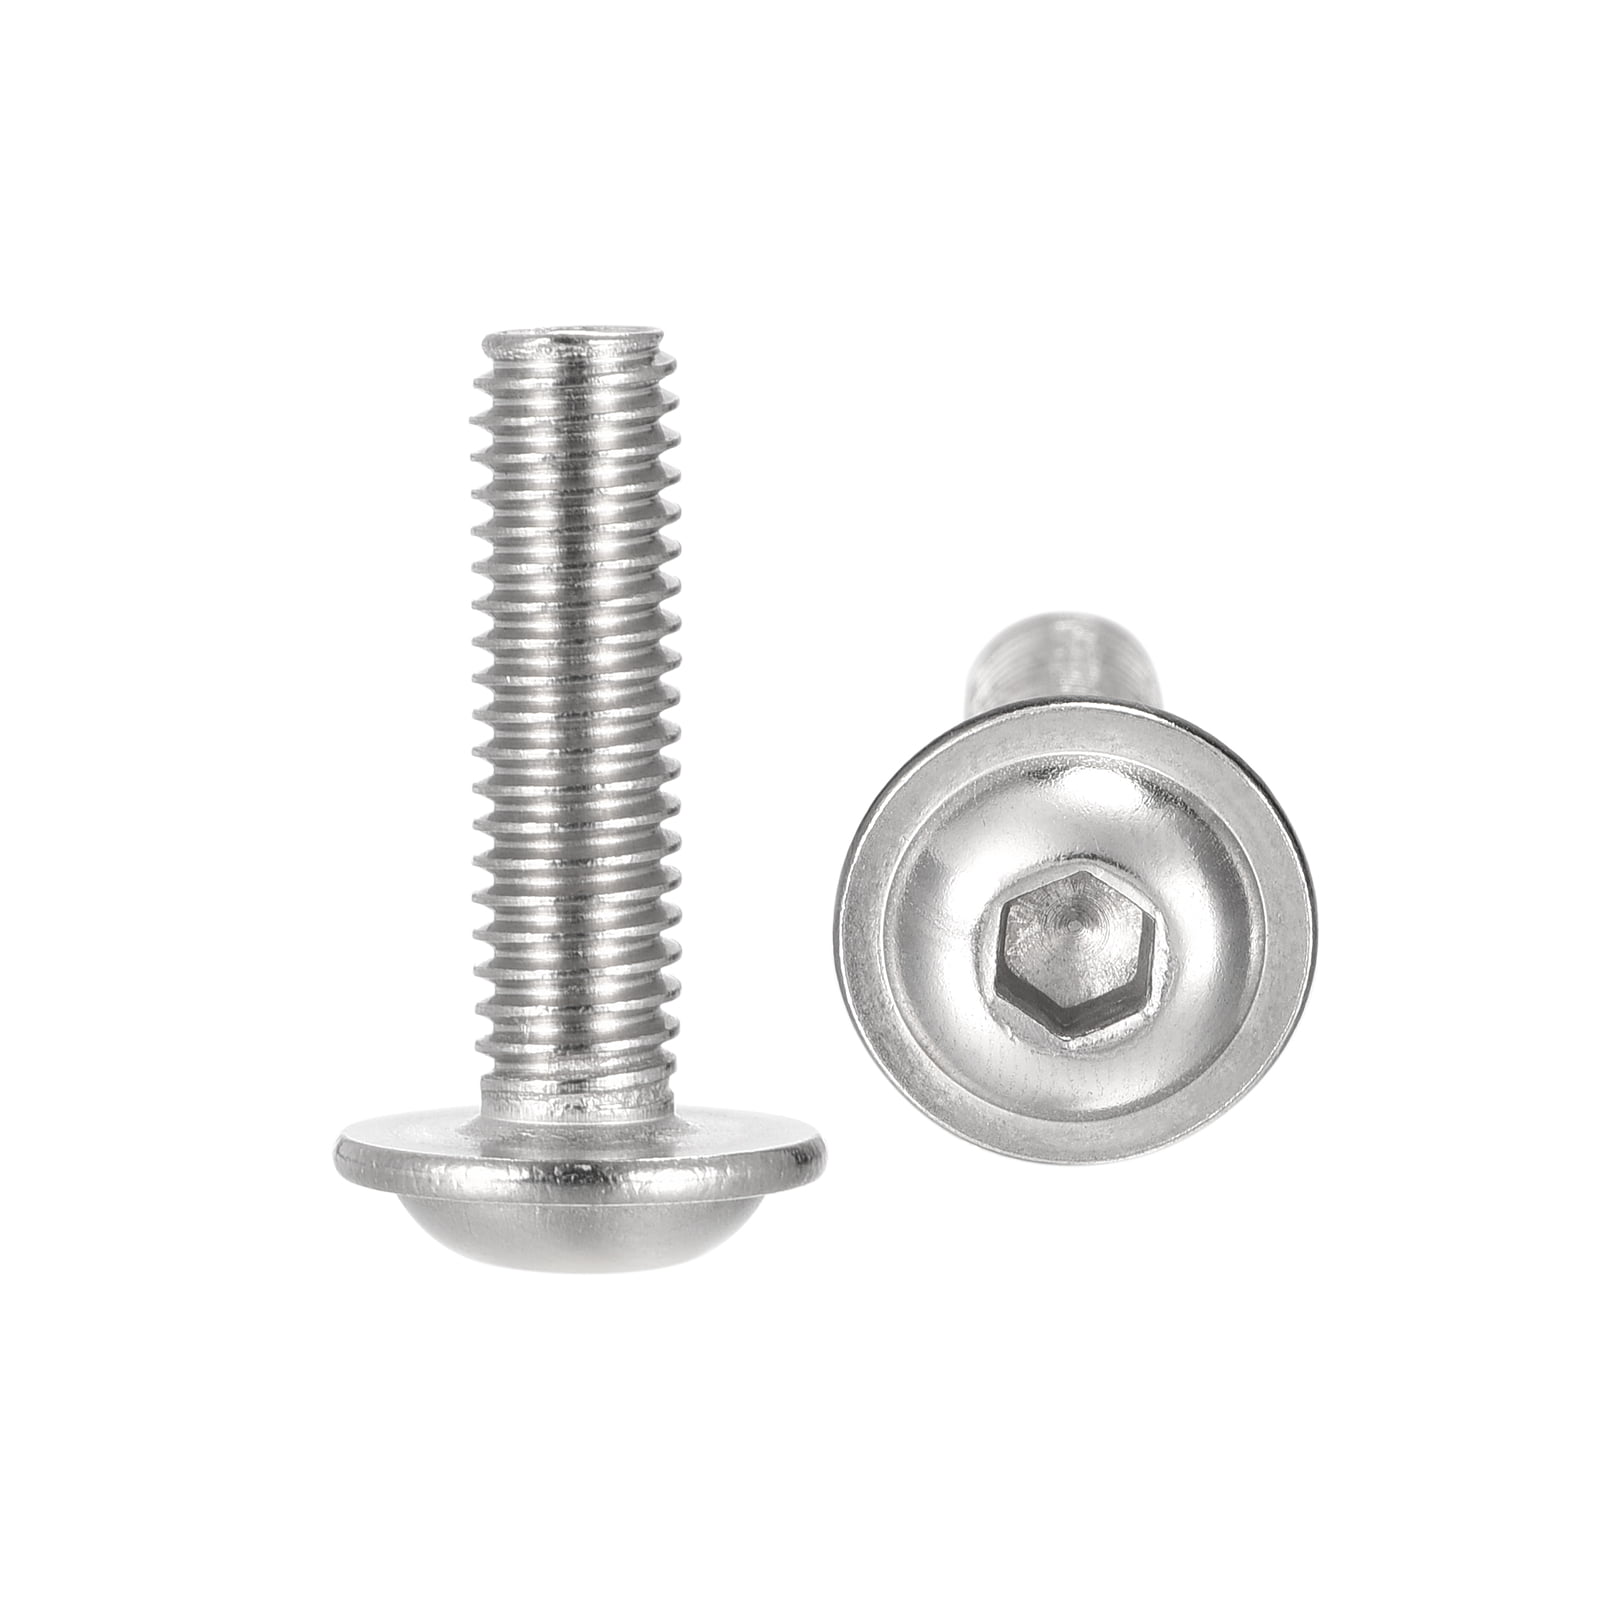 M6 x 25mm Button head socket screw 304 stainless steel QTY 50 